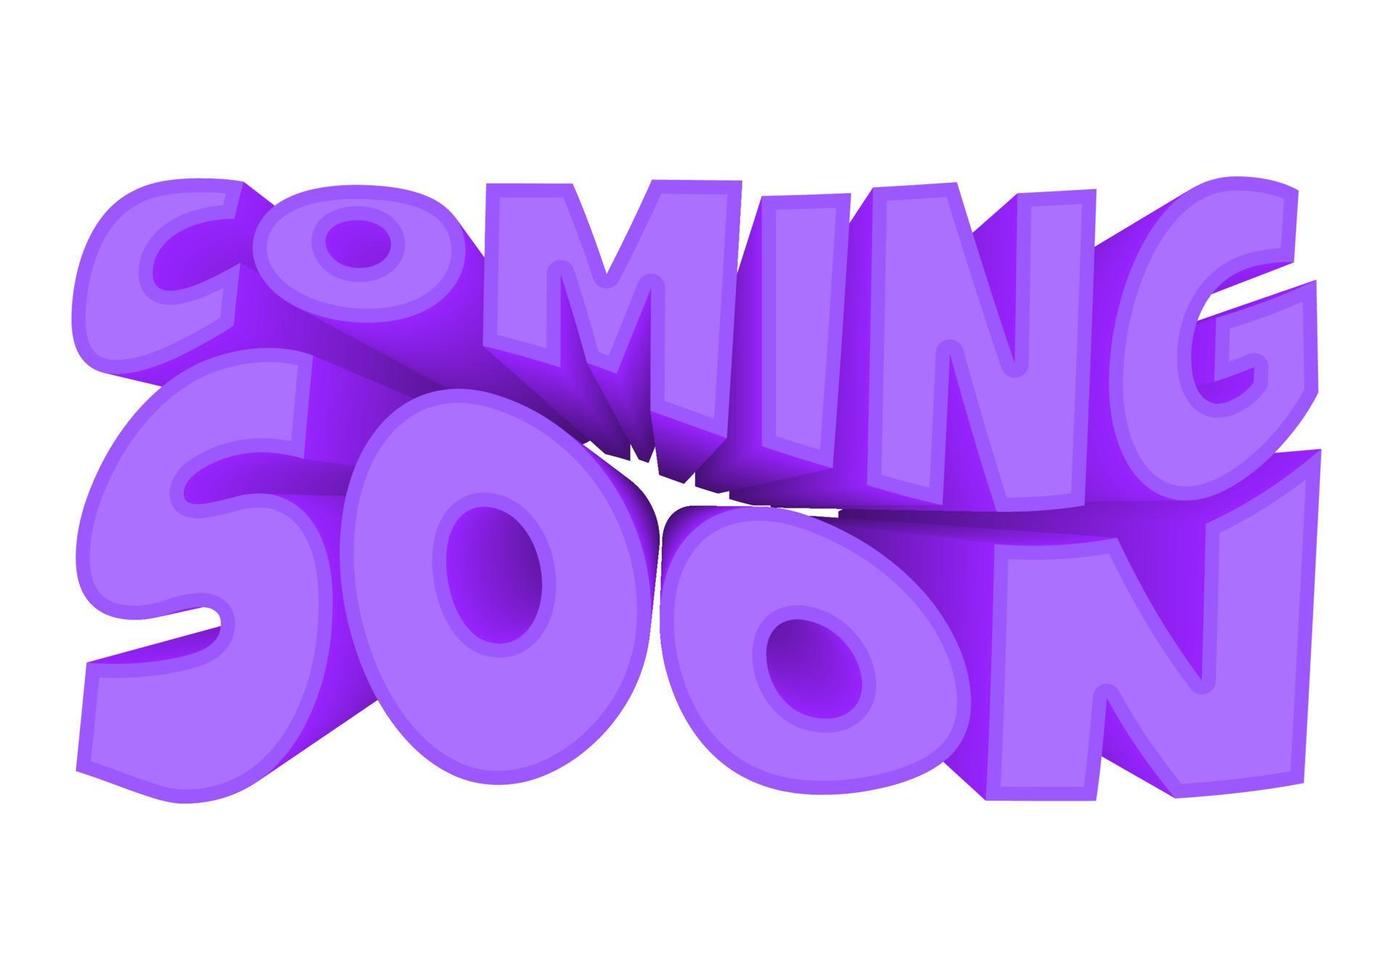 3D Coming Soon Banner Background Illustration vector